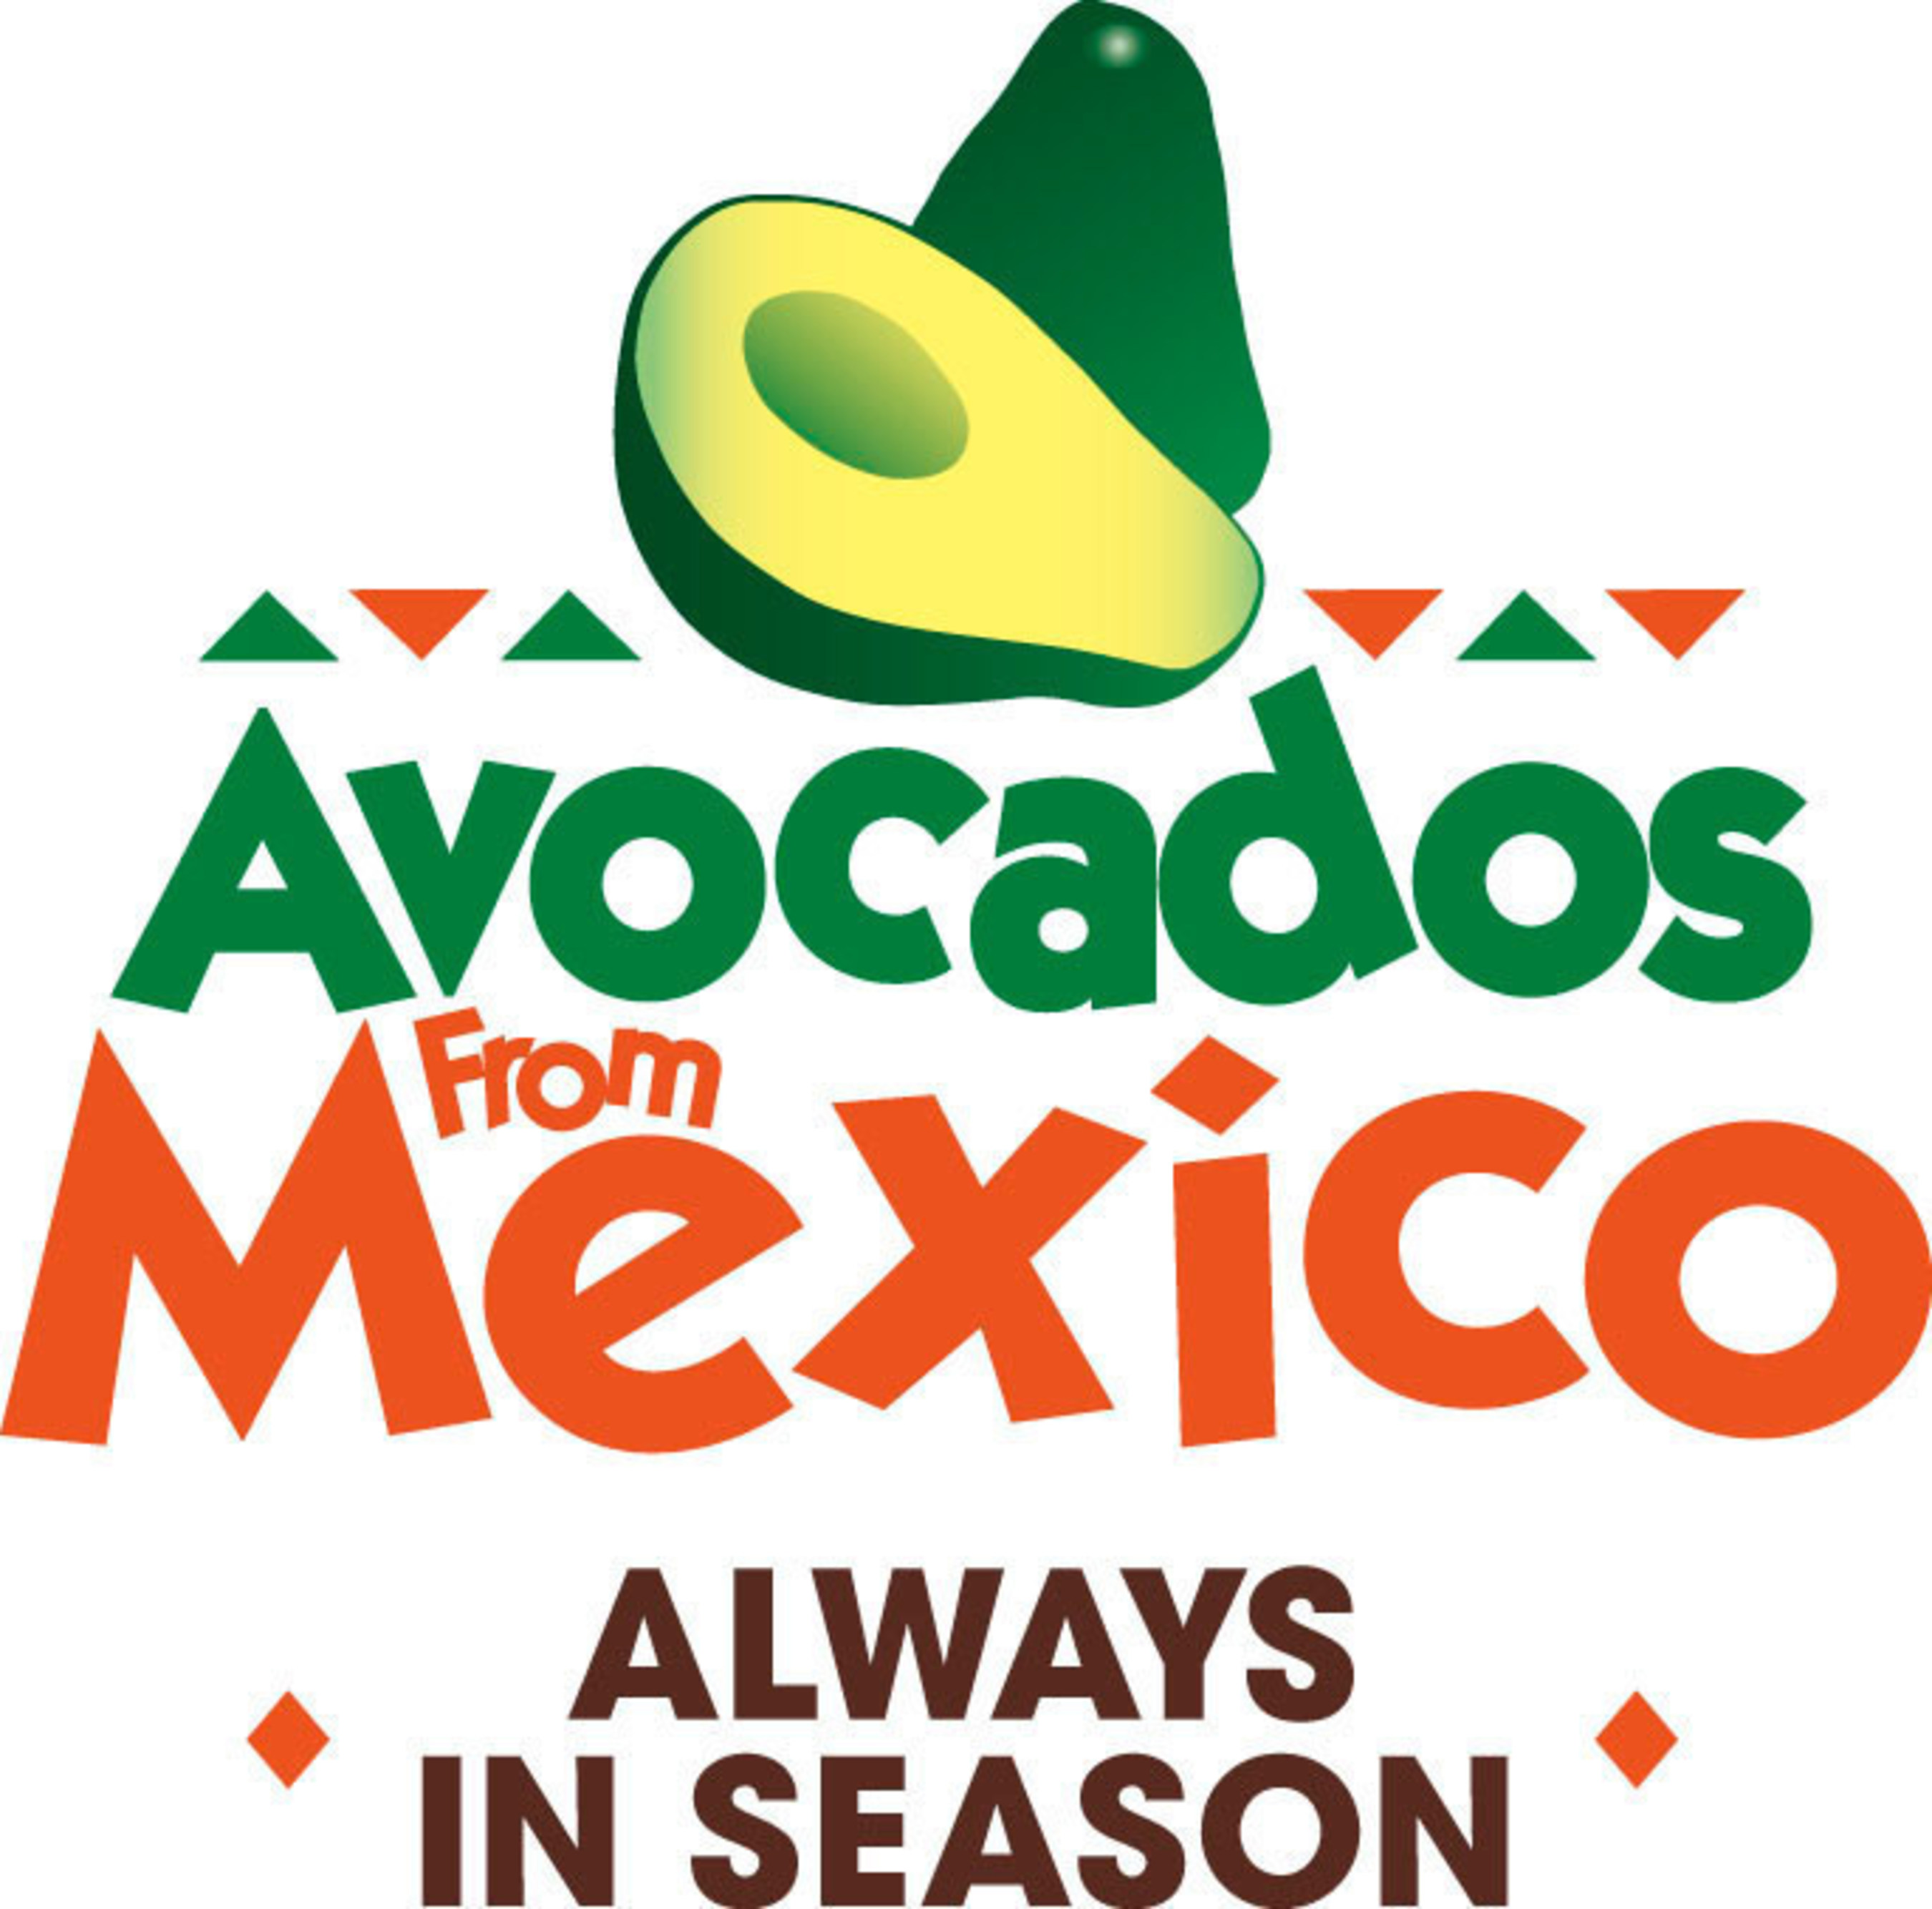 Avocados From Mexico is confirmed to advertise during the 2016 Big Game. The spot will showcase the number-one selling avocado brand and reinforce the fruit's Mexican origin and year-round availability.